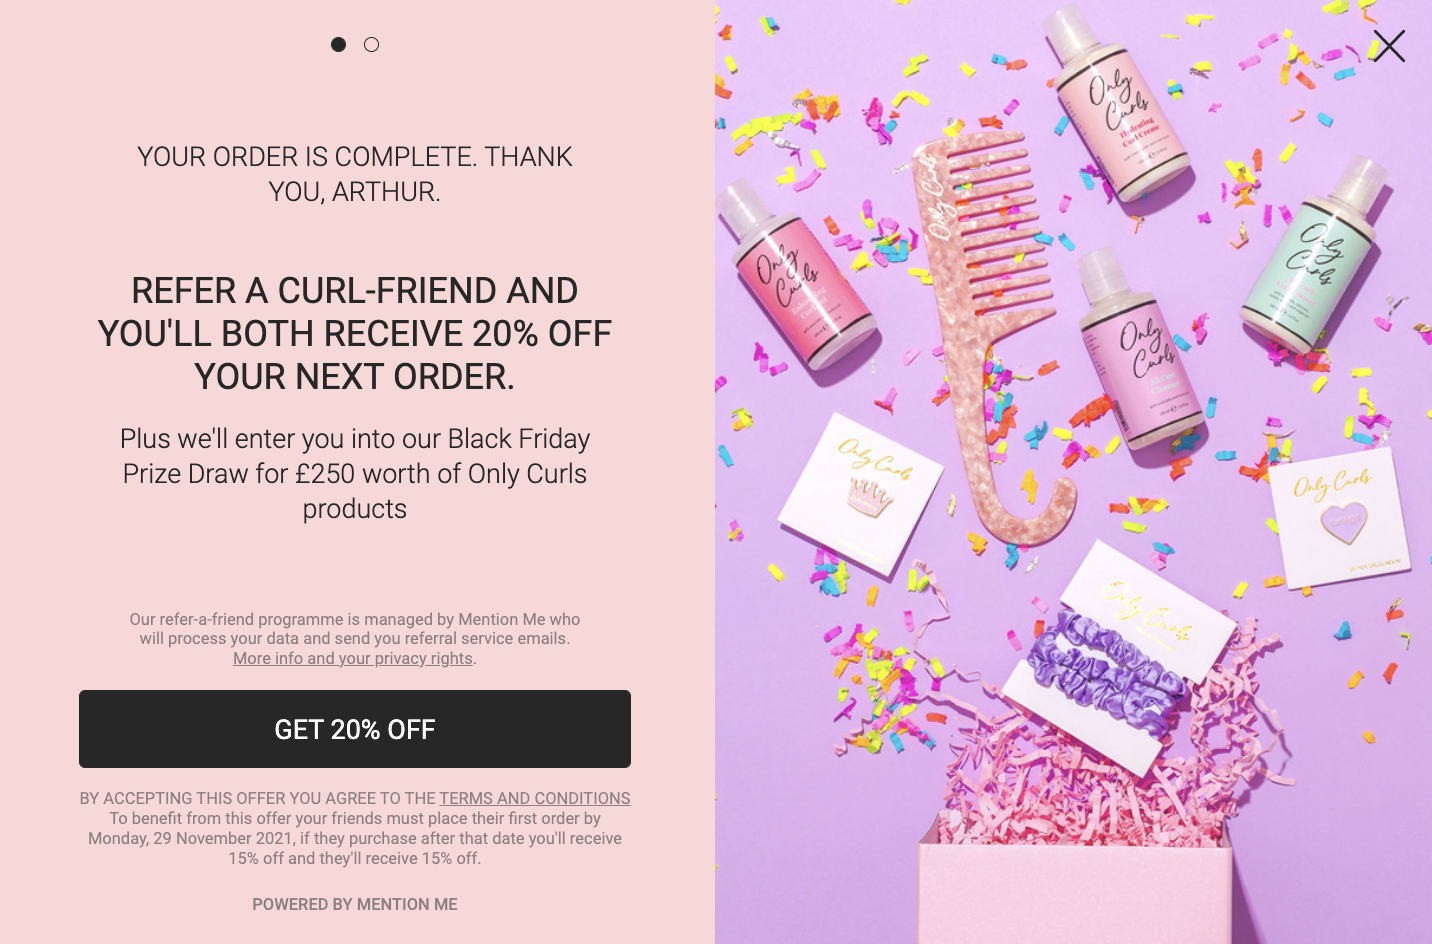 Only Curls promotes its referral offer for Black Friday 2021